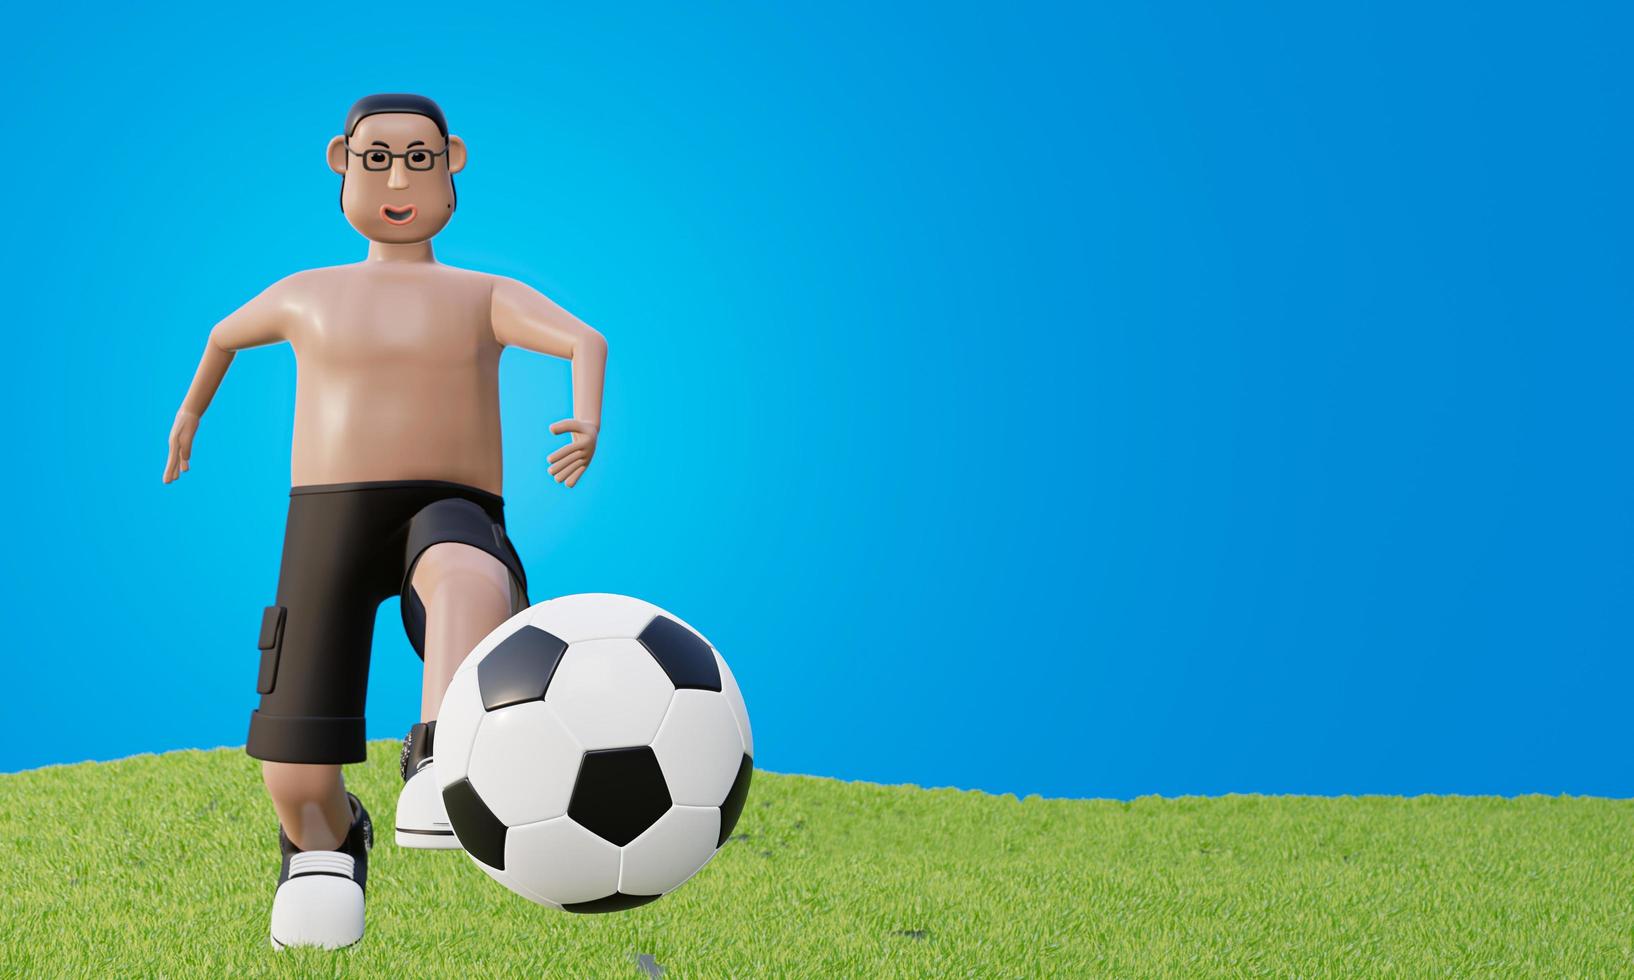 3D model of a young man with glasses, no shirt, but sports shoes. plump appearance Kicking soccer on the lawn. Play soccer on the field for exercise. It's not a competition. photo